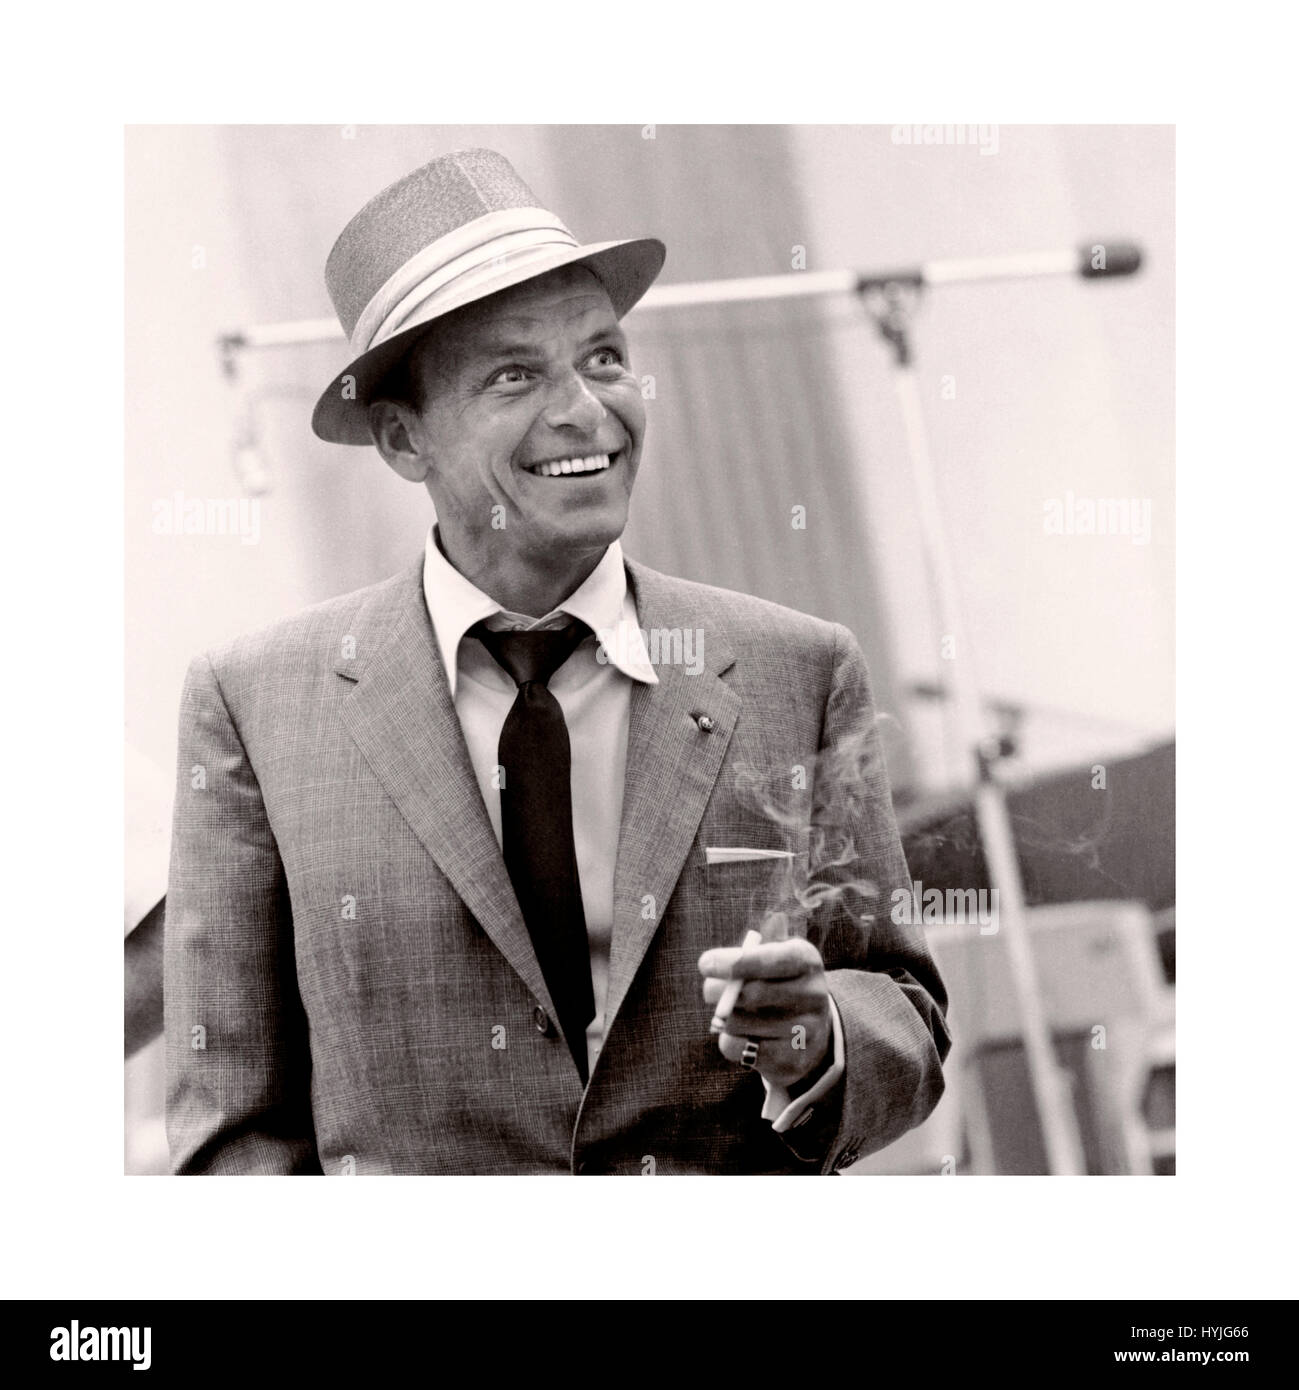 Frank Sinatra 1950's studio informal relaxed smiling promotional still image, wearing a hat smiling and smoking a cigarette in a recording studio situation Stock Photo